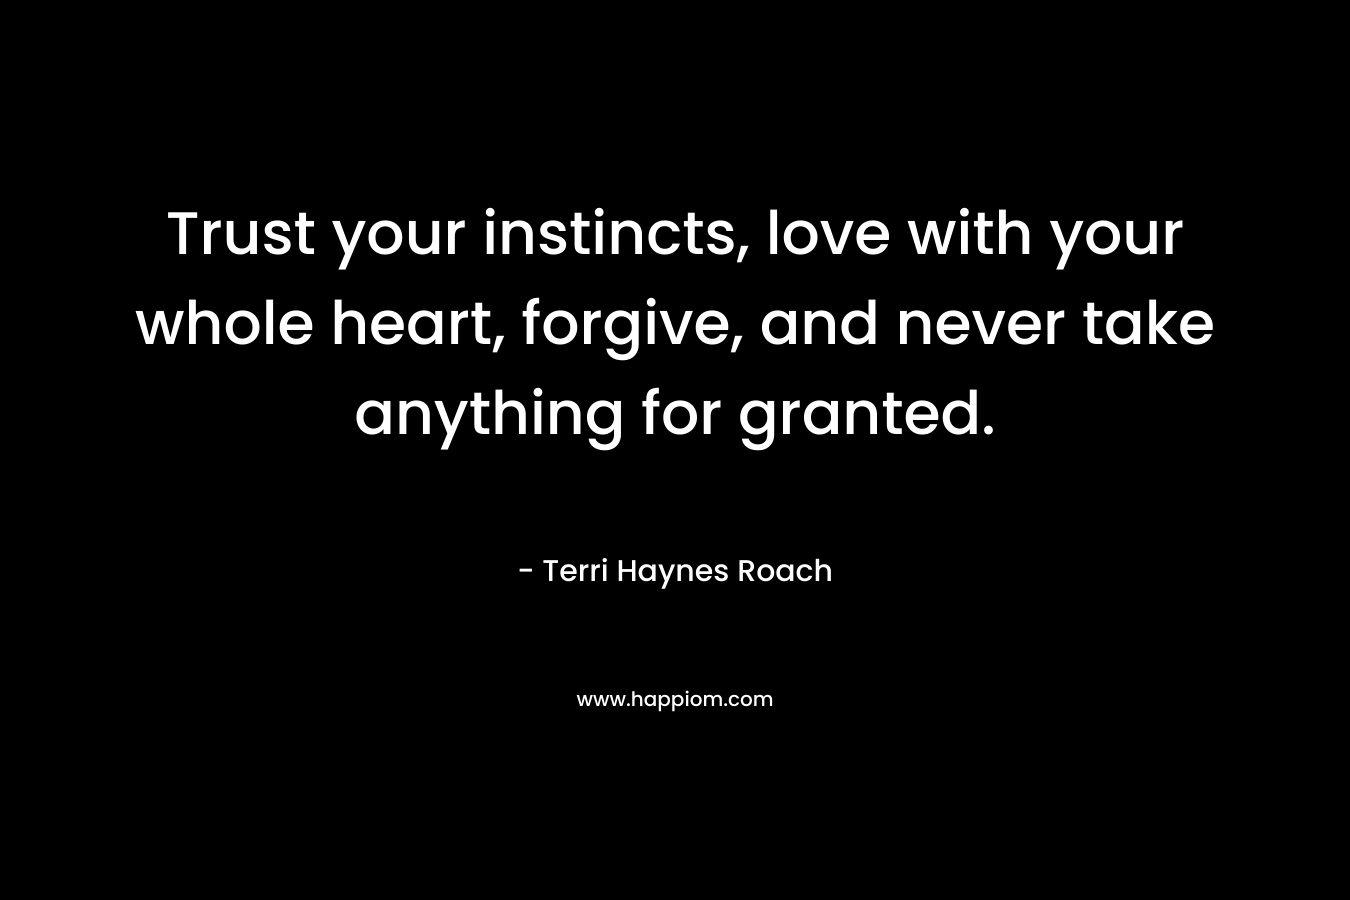 Trust your instincts, love with your whole heart, forgive, and never take anything for granted.